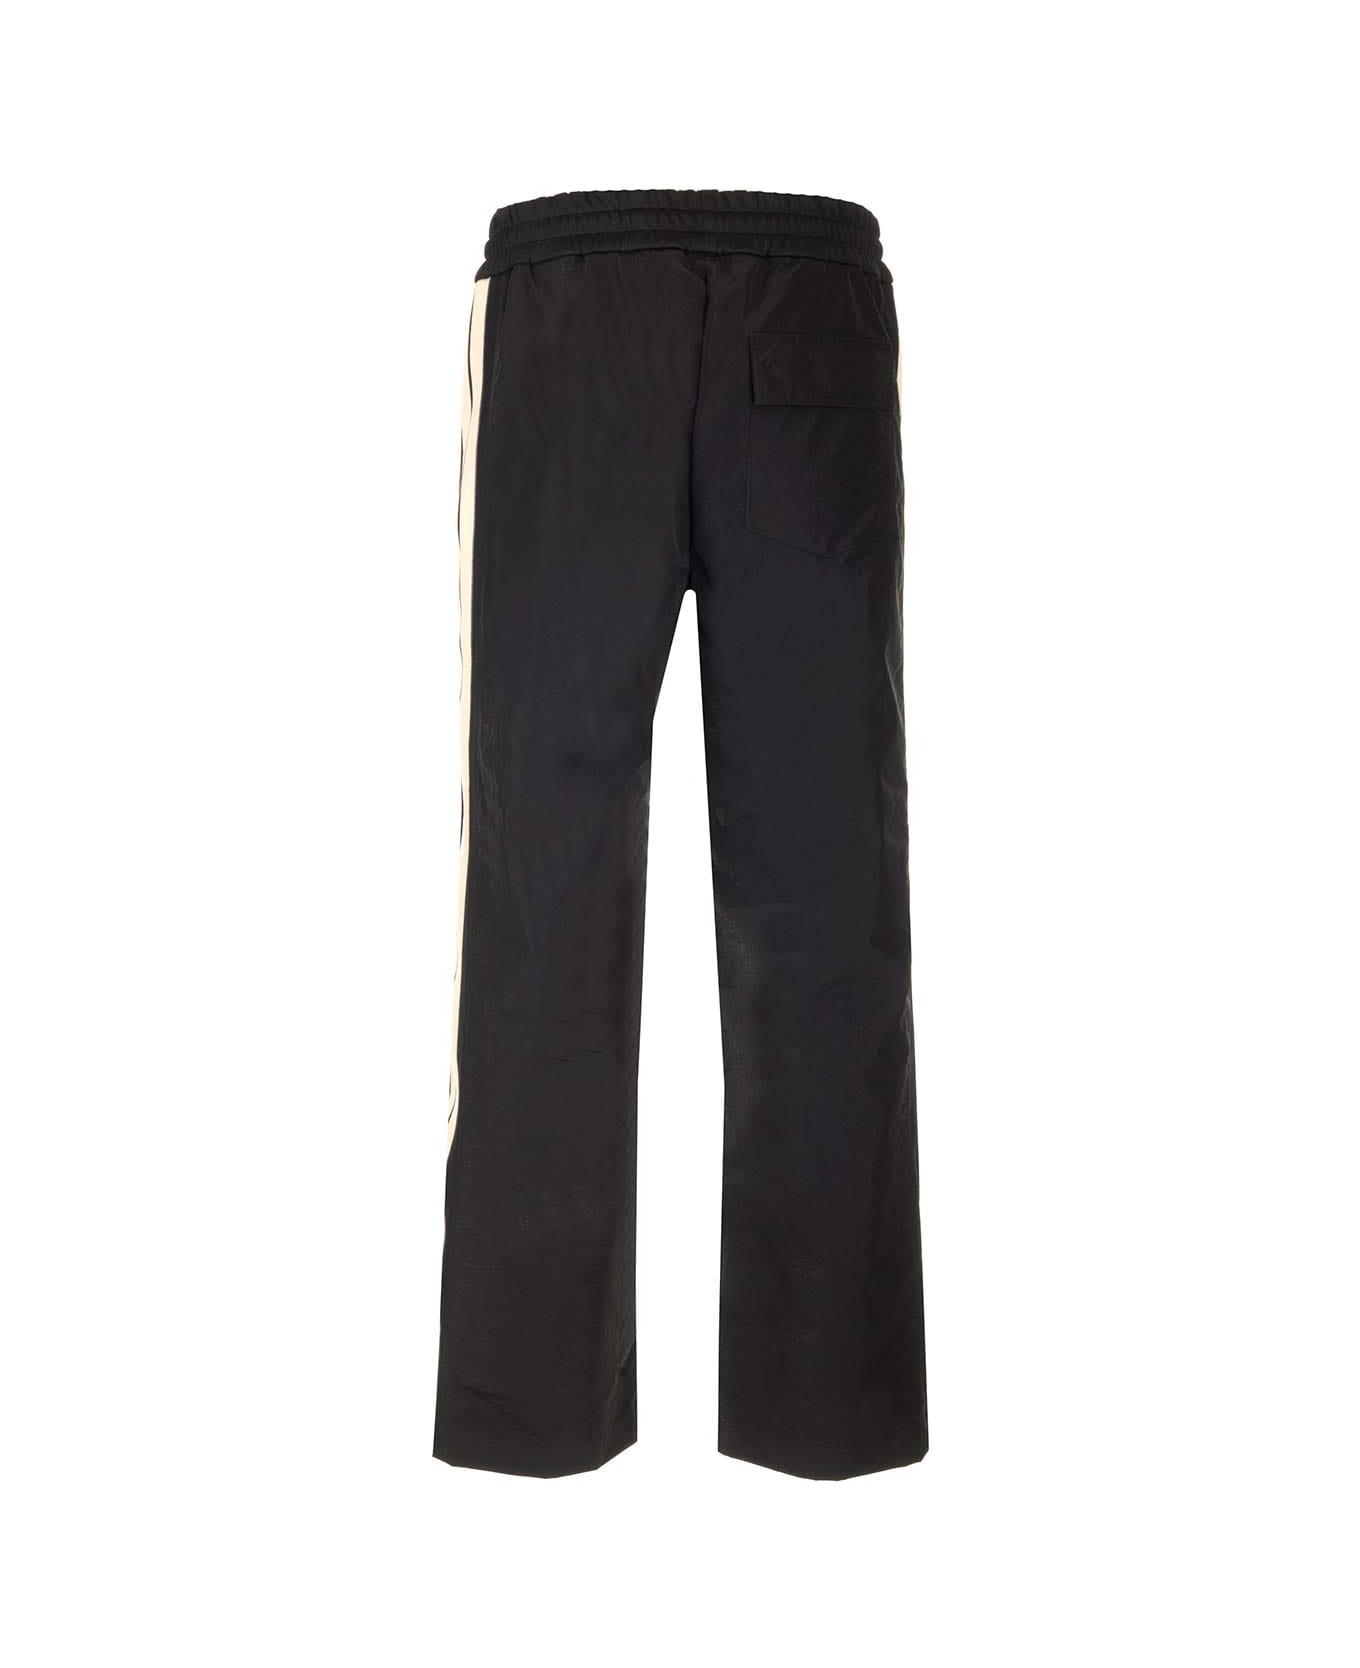 Palm Angels Nylon Track Pants With Bands - Black ボトムス